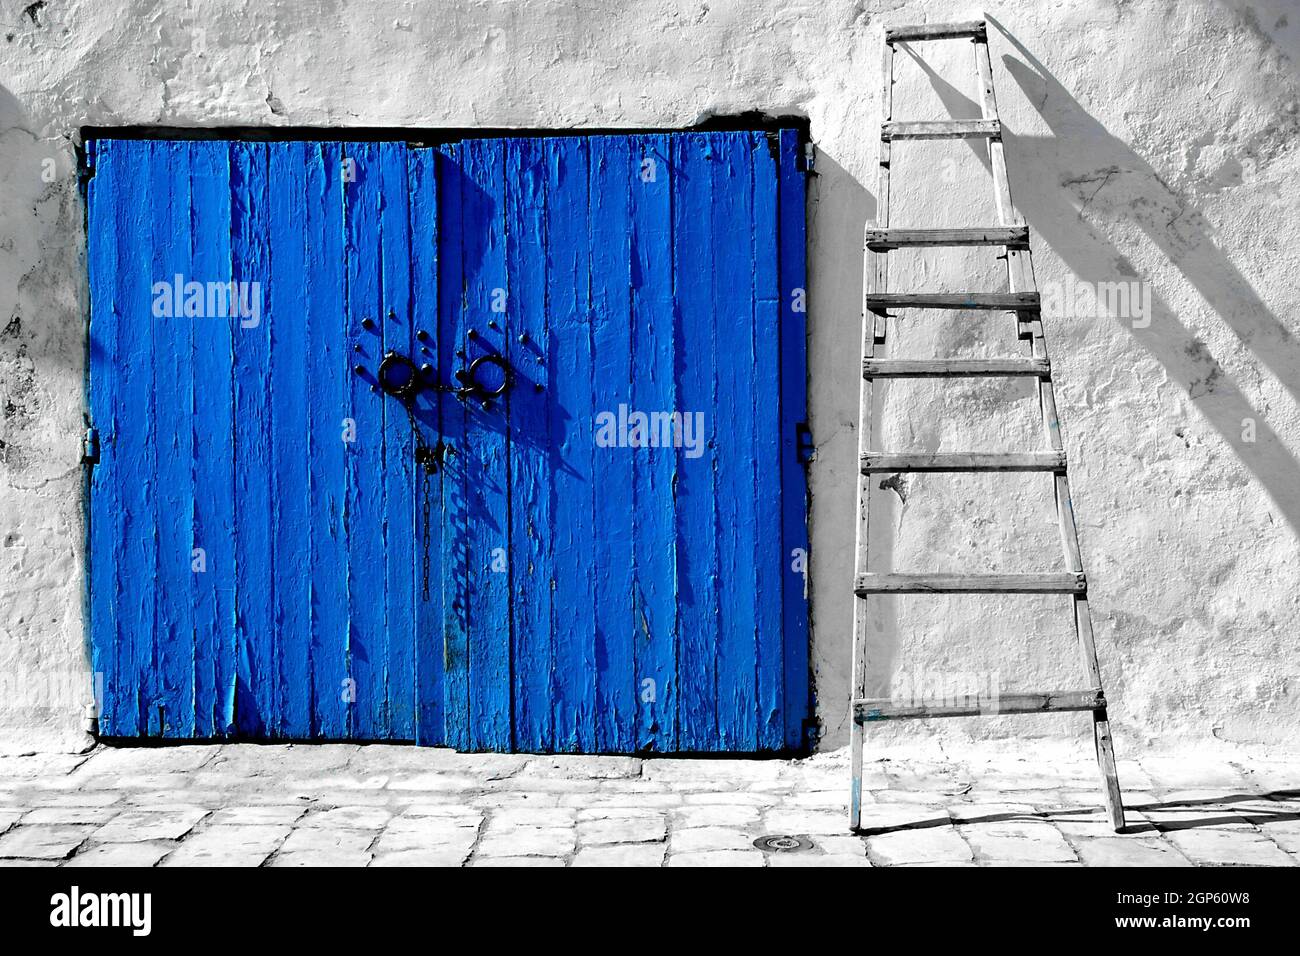 View of a blue wooden door with metal handles and ladder leaning on the wall next to it Stock Photo